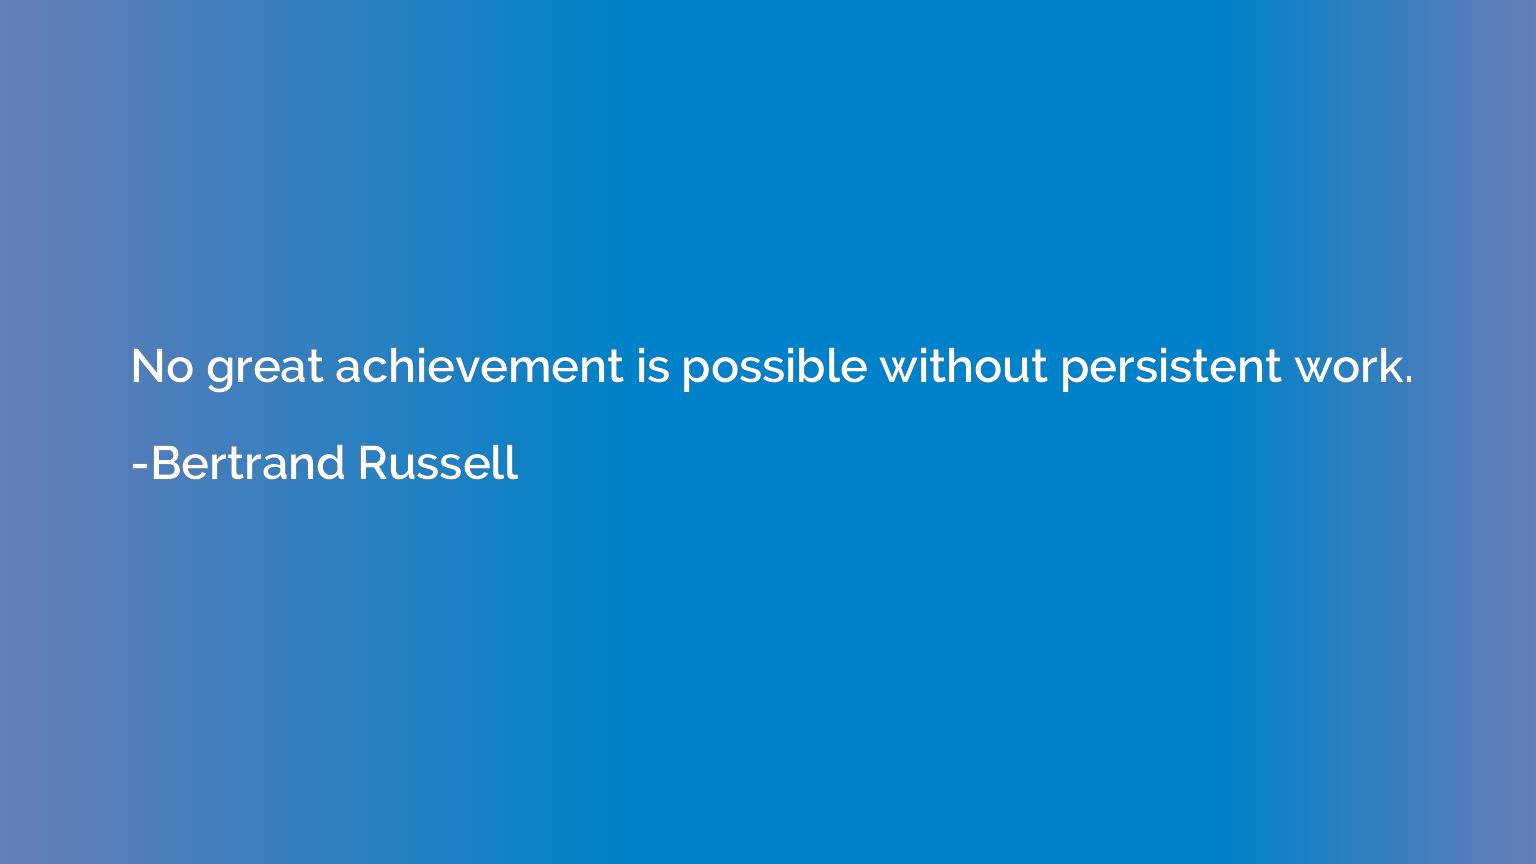 No great achievement is possible without persistent work.